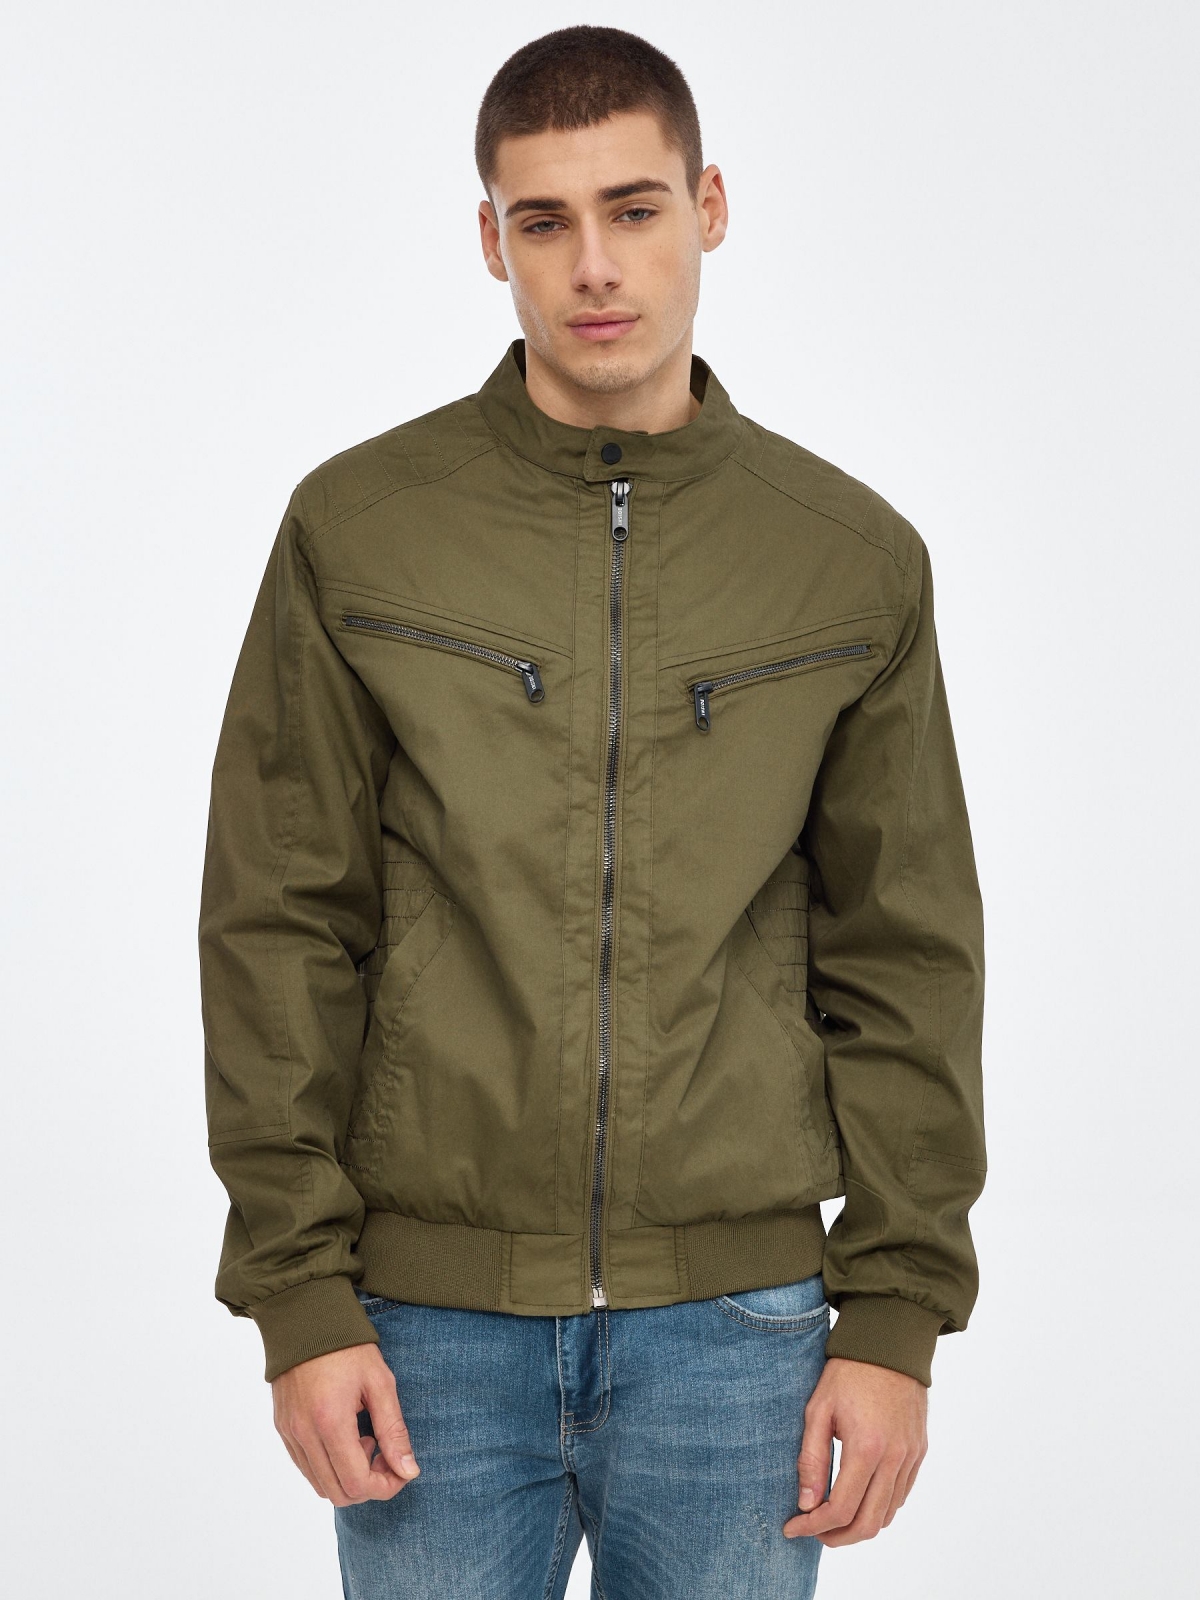 Black nylon jacket green middle front view